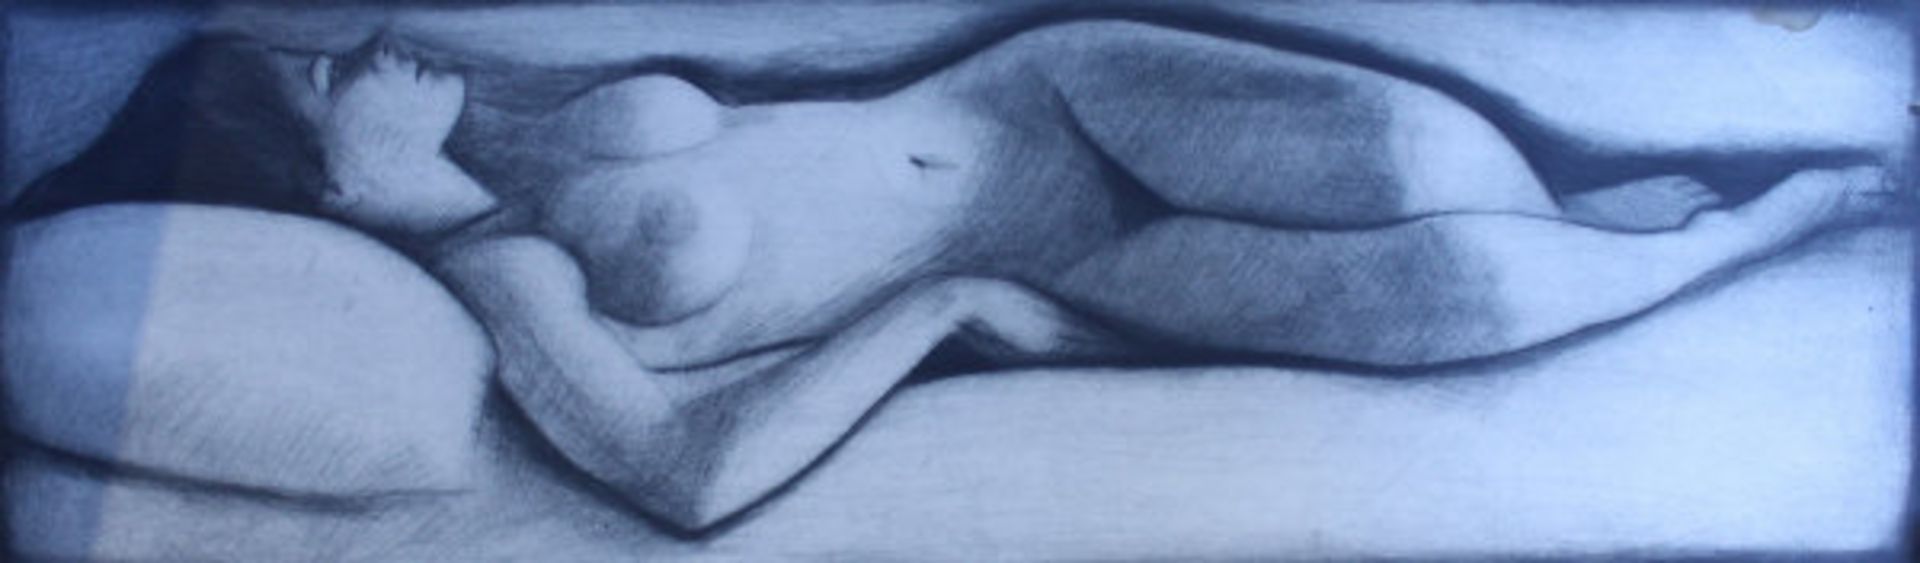 FRANK ARIS "Nude" study in sepia monochrome acrylic signed lower left together with AFTER ALDINO - Image 2 of 2